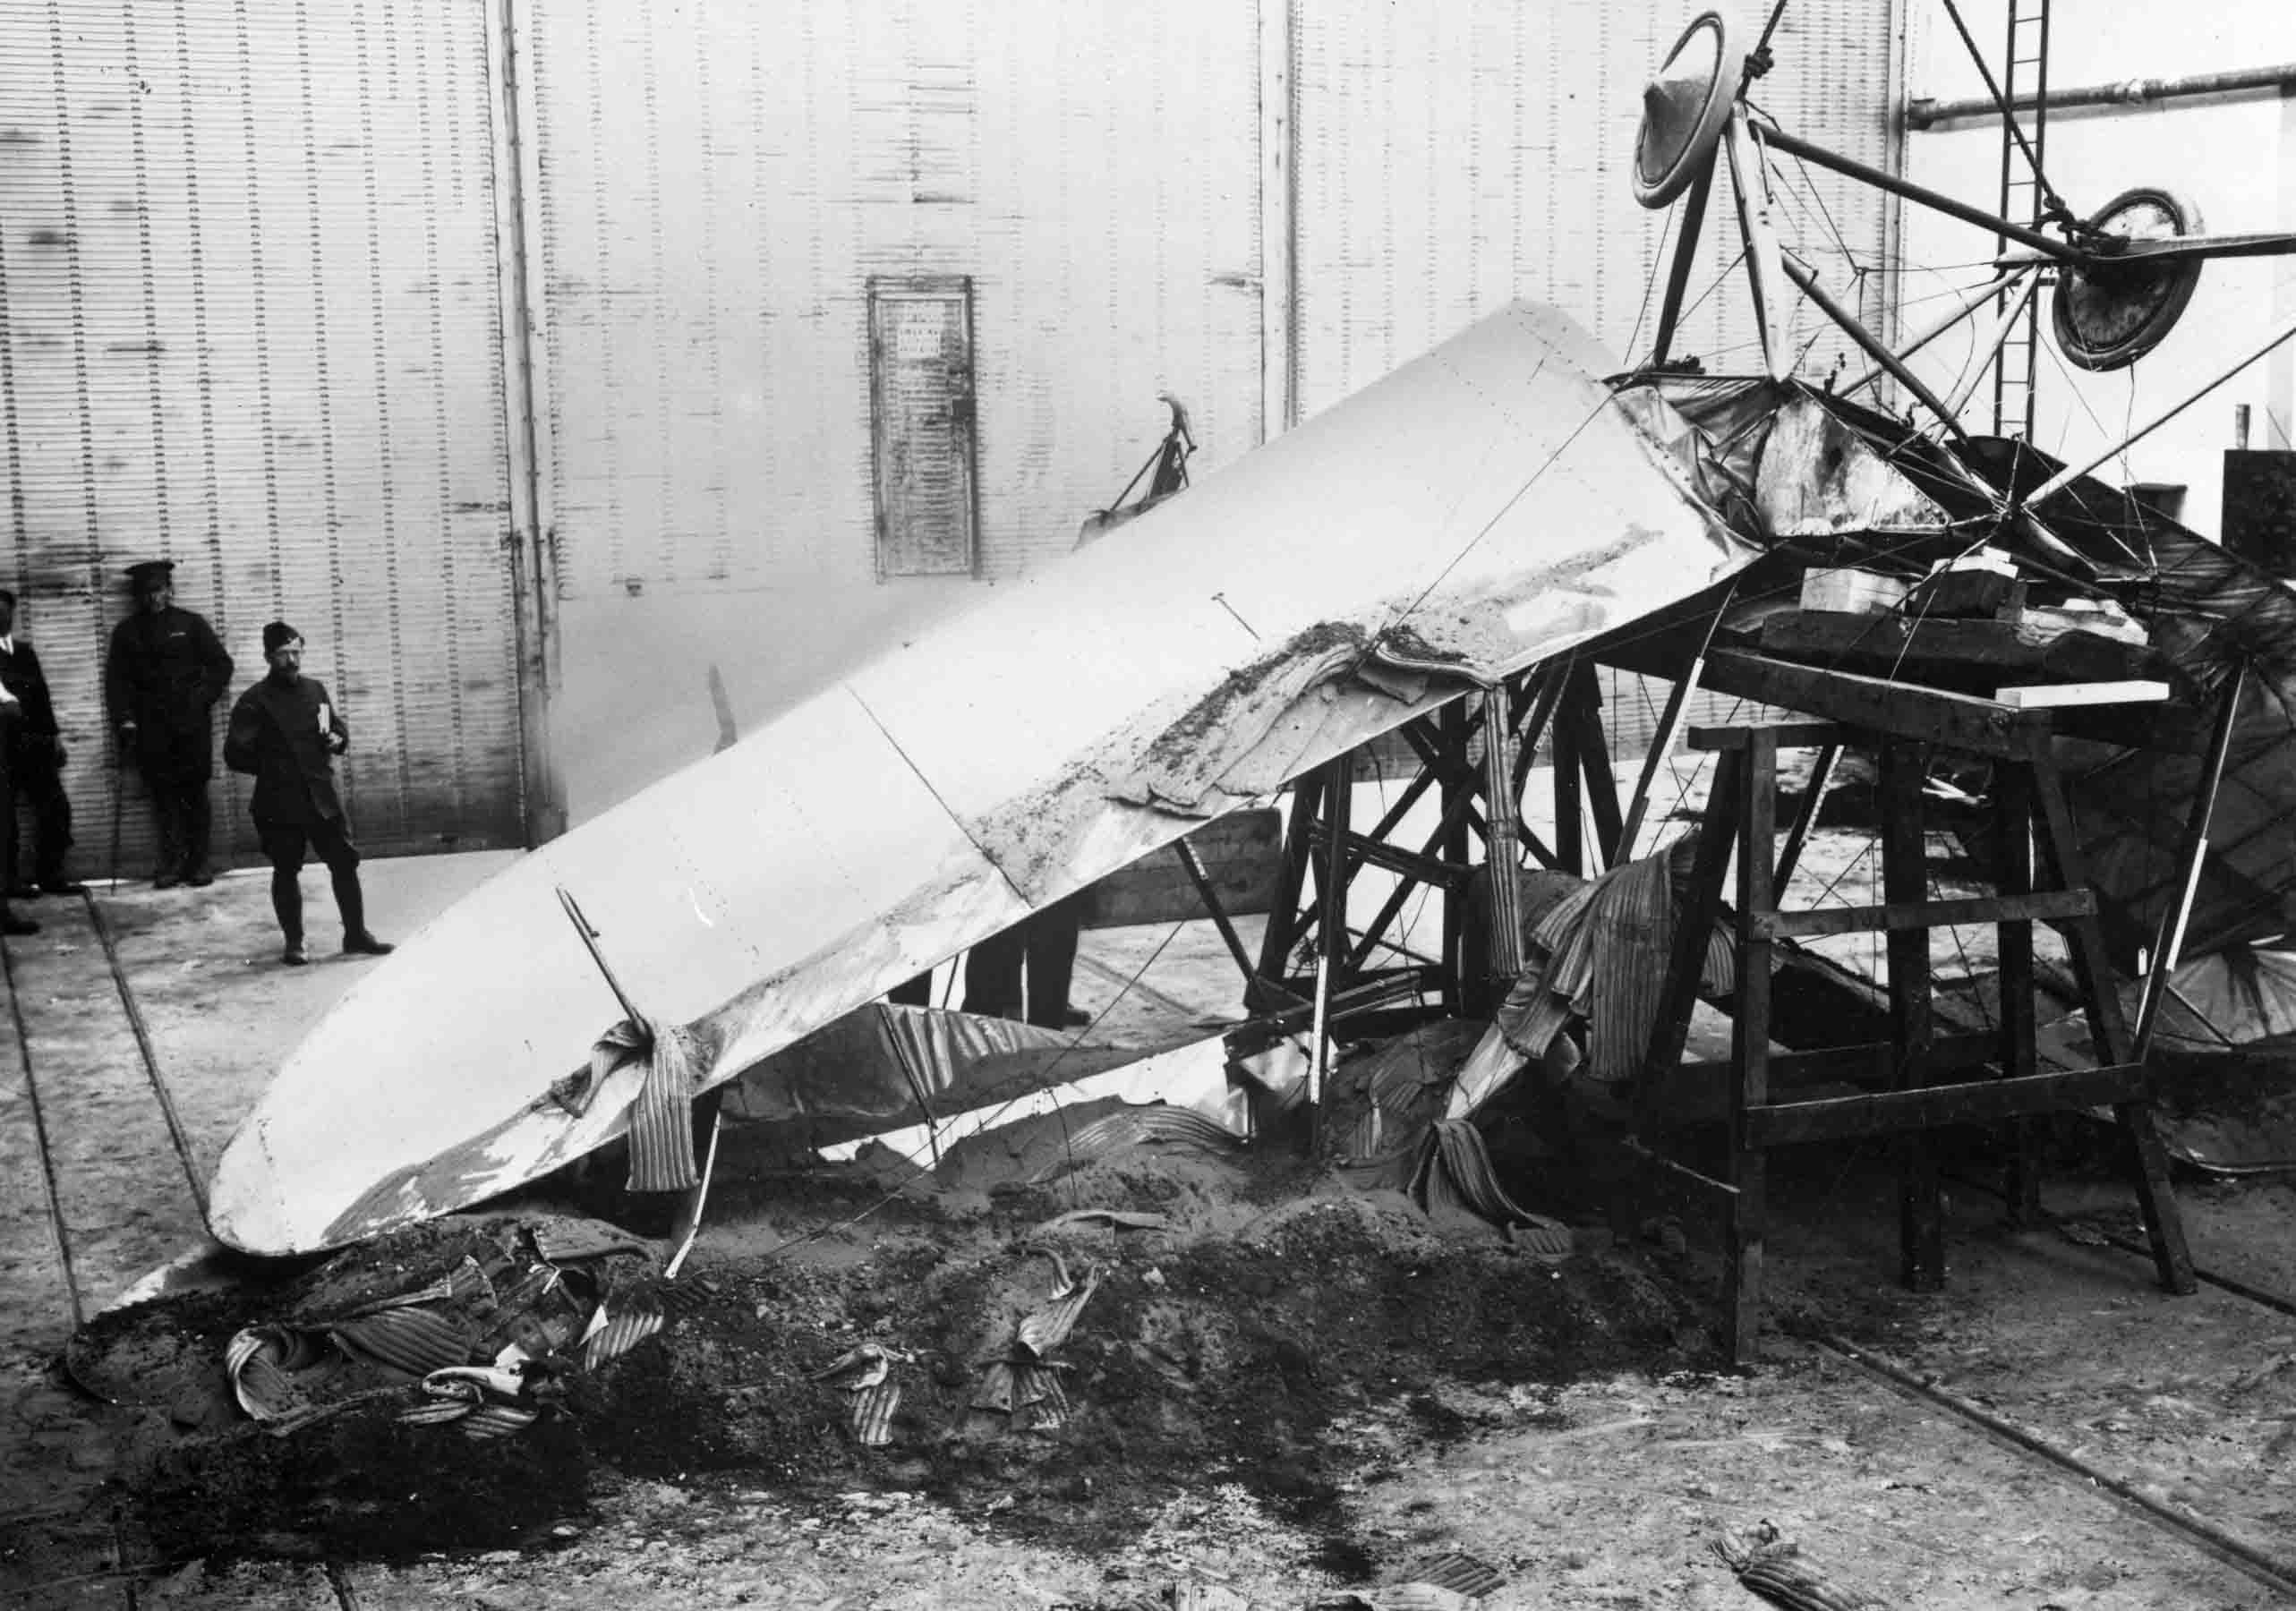 The result of a loading test on a Royal Aircraft Factory B.E.2a, 1914